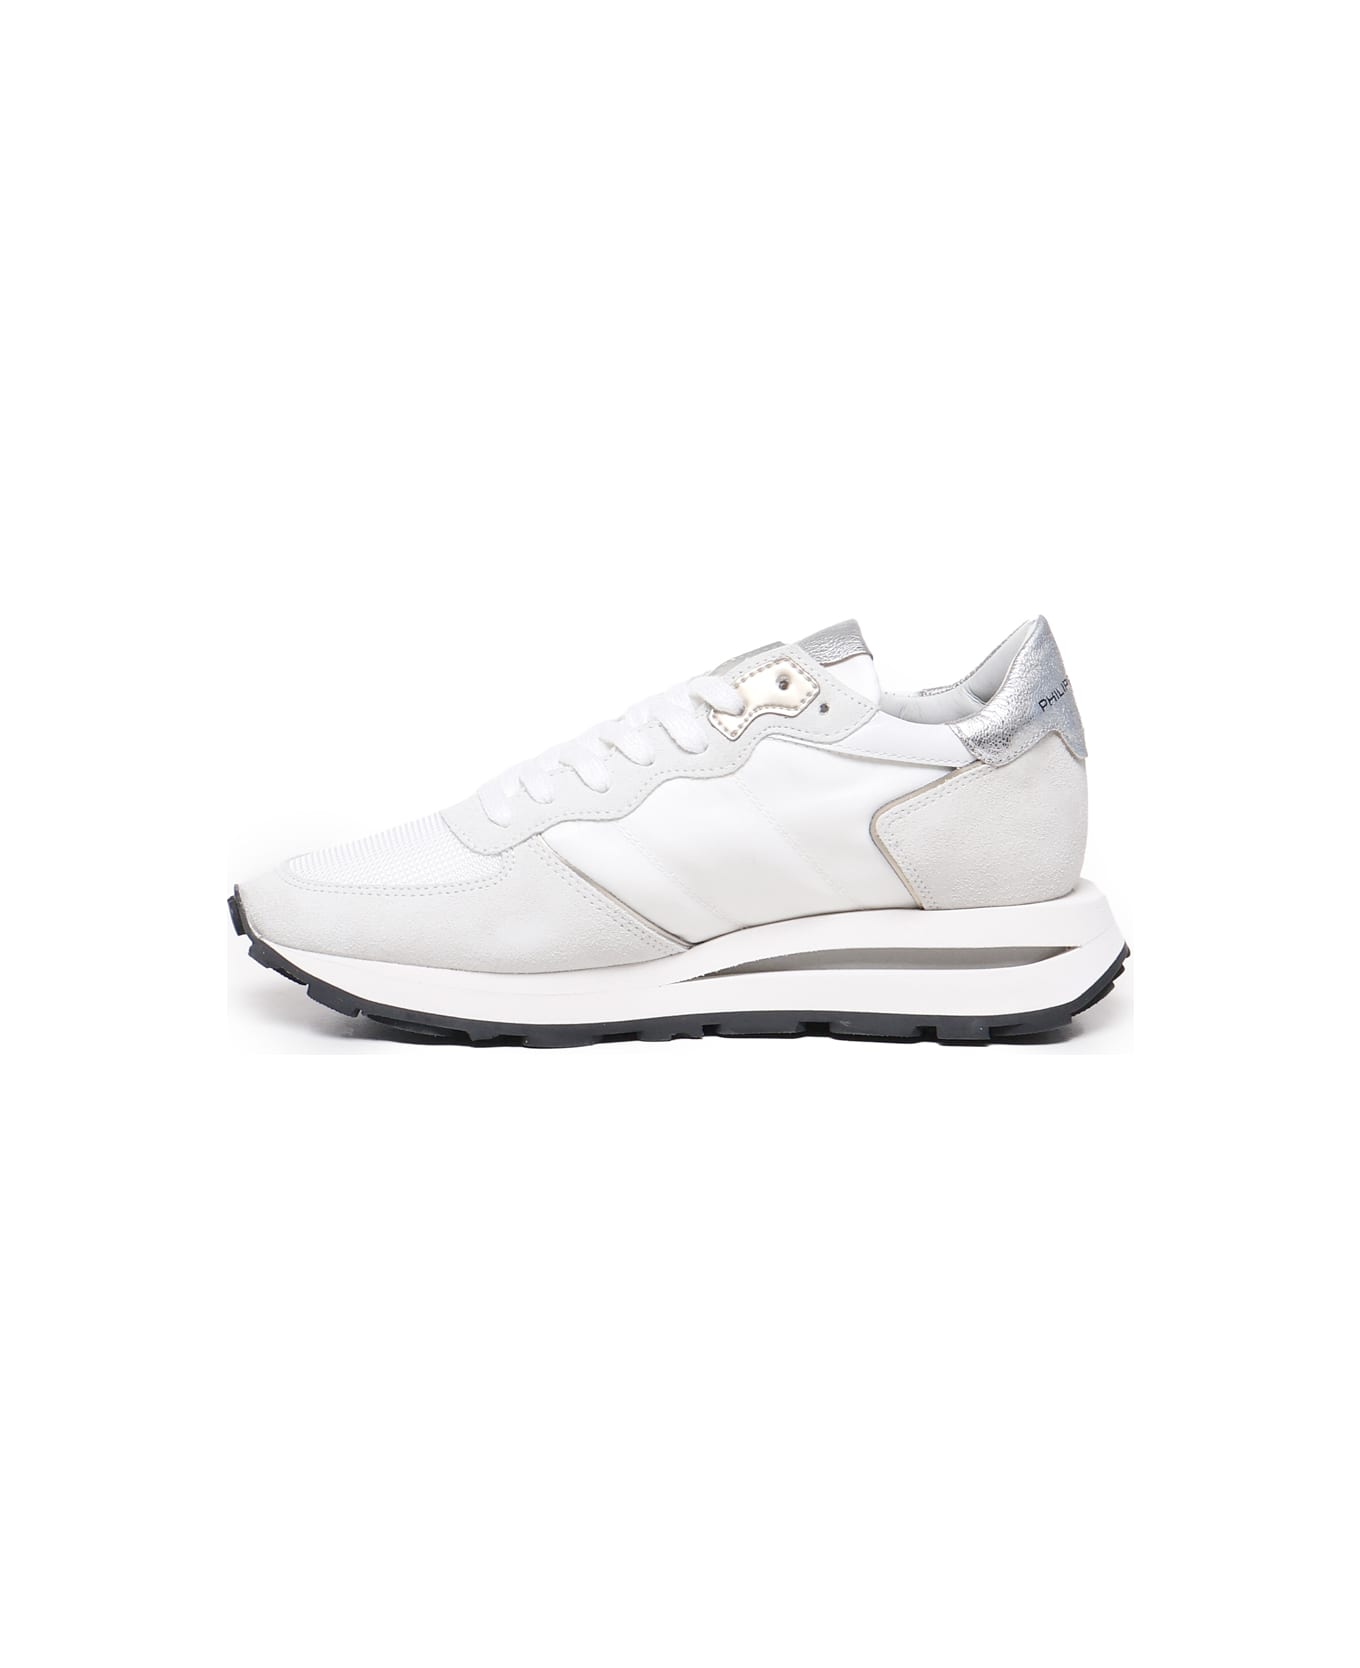 Philippe Model Trpx Sneakers With Insert Design - White